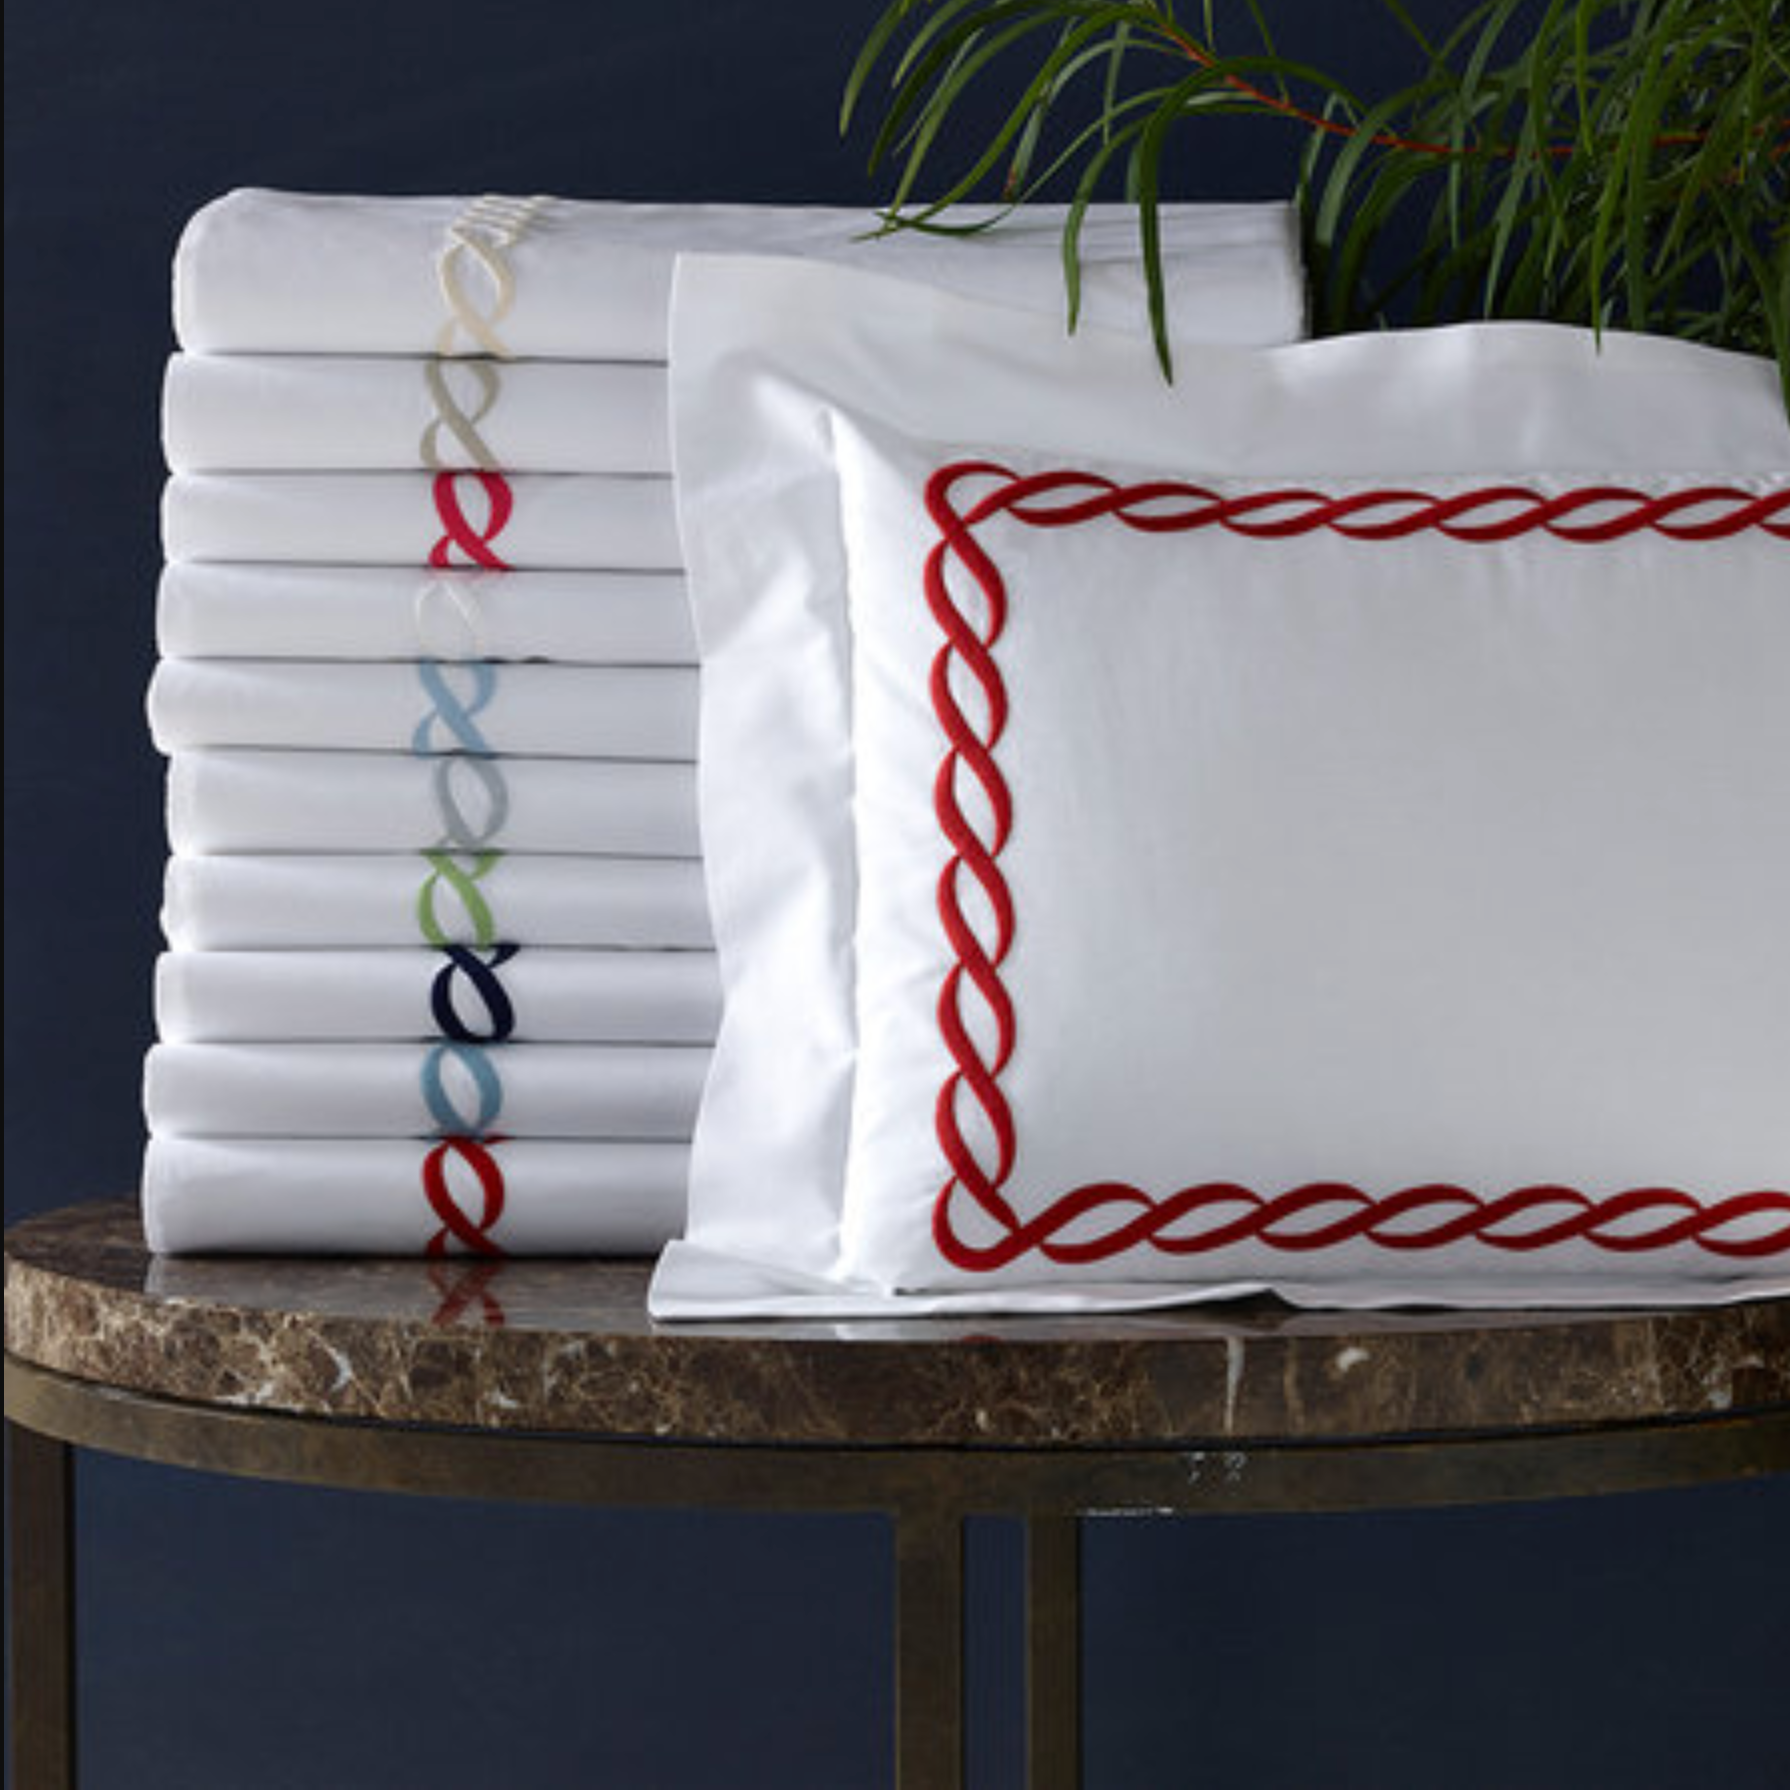 Classic Chain Bed Linens - Pioneer Linens